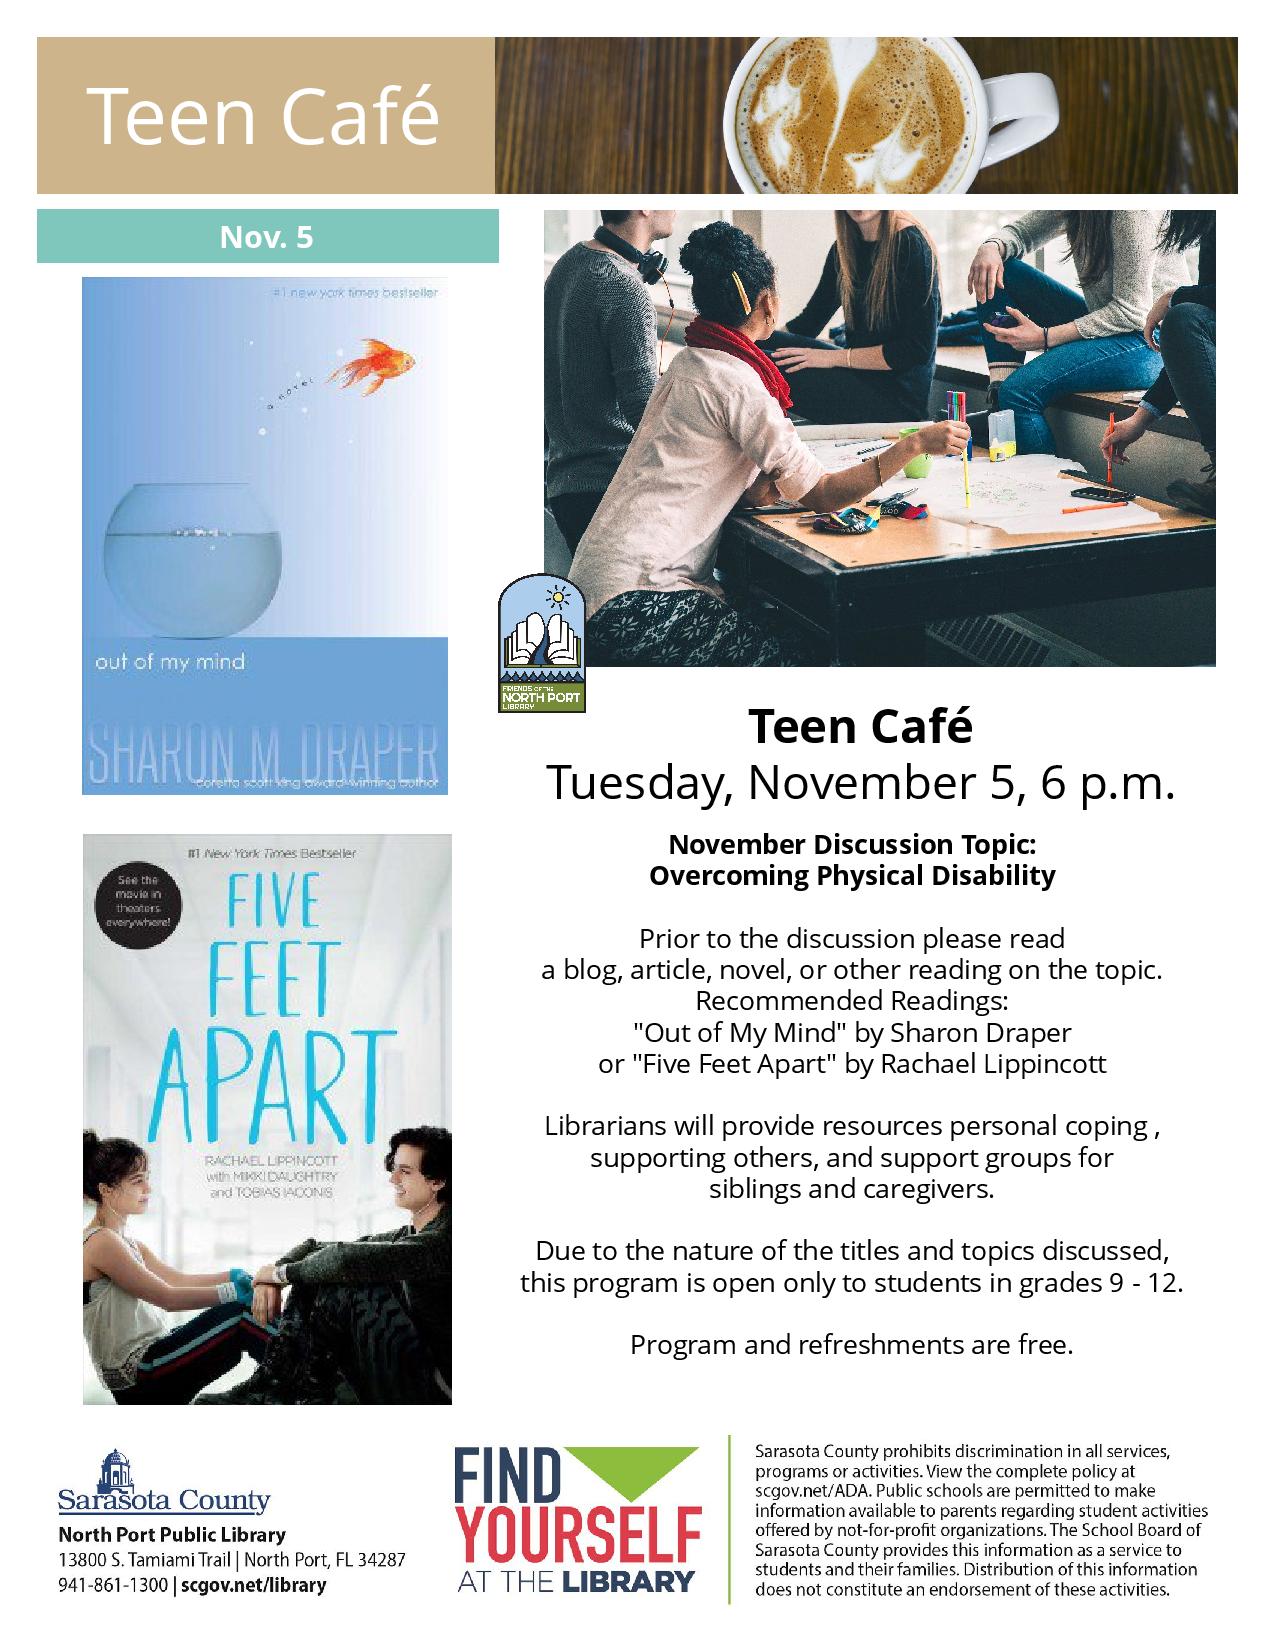 Teen Café Tuesday, November 5, 6 p.m. November Discussion Topic: Overcoming Physical Disability Prior to the discussion please read a blog, article, novel, or other reading on the topic. Recommended Readings: "Out of My Mind" by Sharon Draper or "Five Feet Apart" by Rachael Lippincott Librarians will provide resources personal coping , supporting others, and support groups for siblings and caregivers. Due to the nature of the titles and topics discussed, this program is open only to students in grades 9 - 1